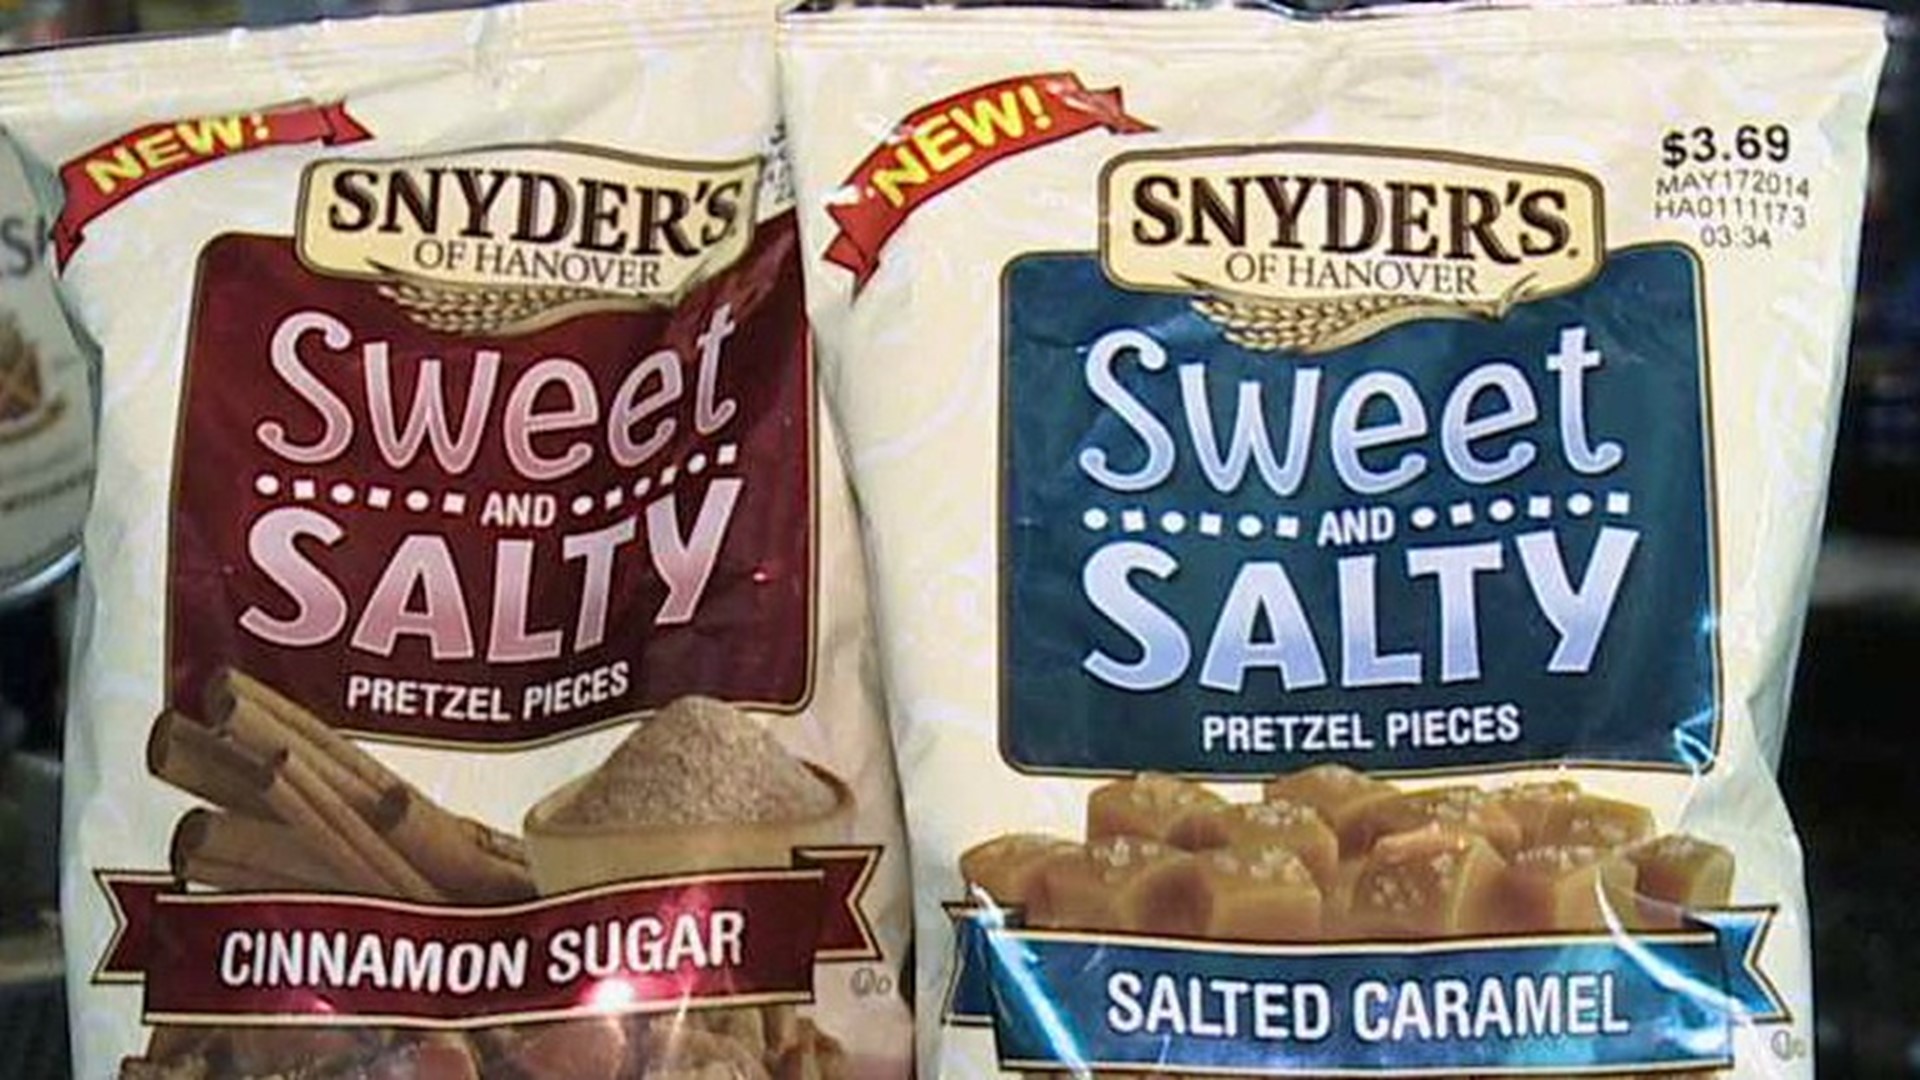 Snyder's Sweet And Salty Pretzel Pieces